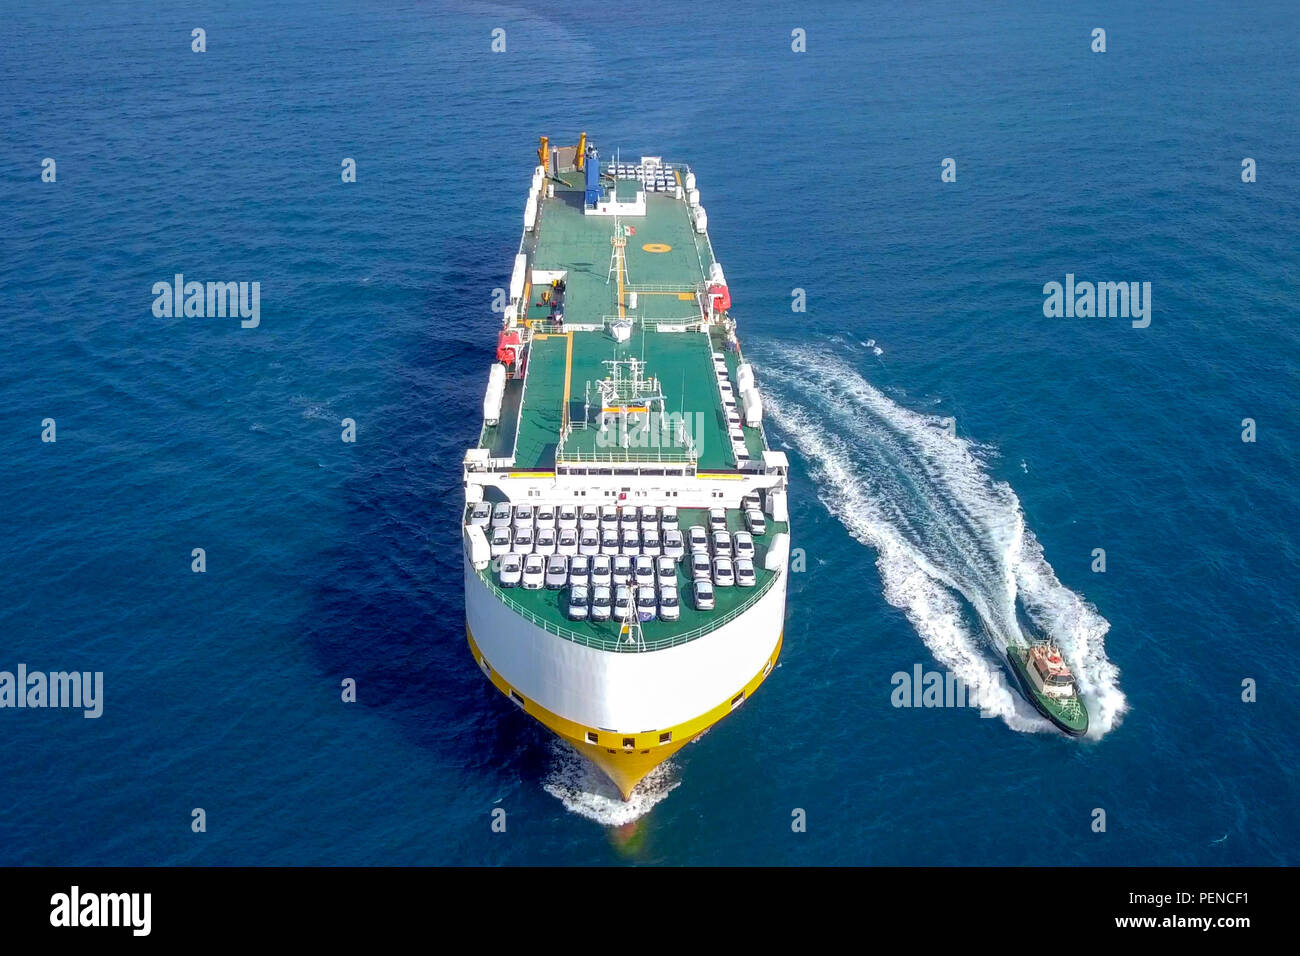 Aerial image of a Large RoRo (Roll on/off) Vehicle carrie vessel cruising the Mediterranean sea Stock Photo